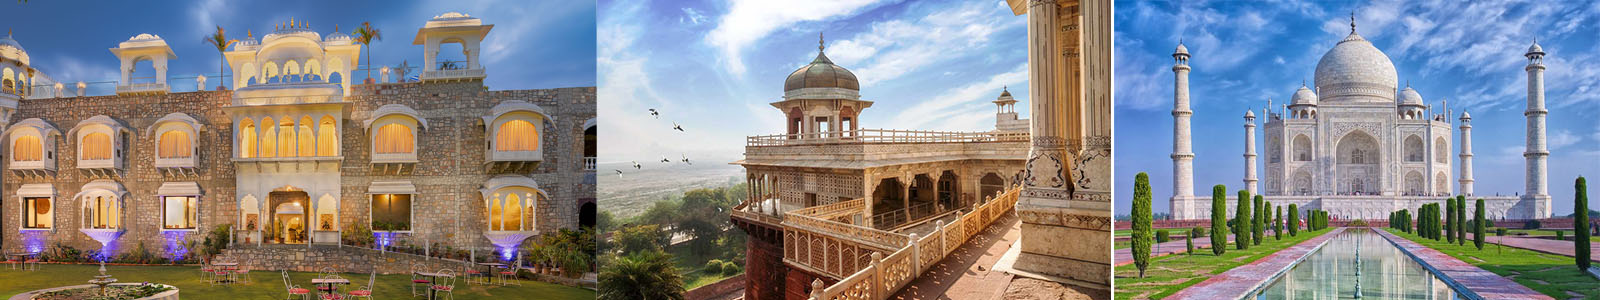 Taj Mahal And Agra Fort Private Day Tour From Jaipur